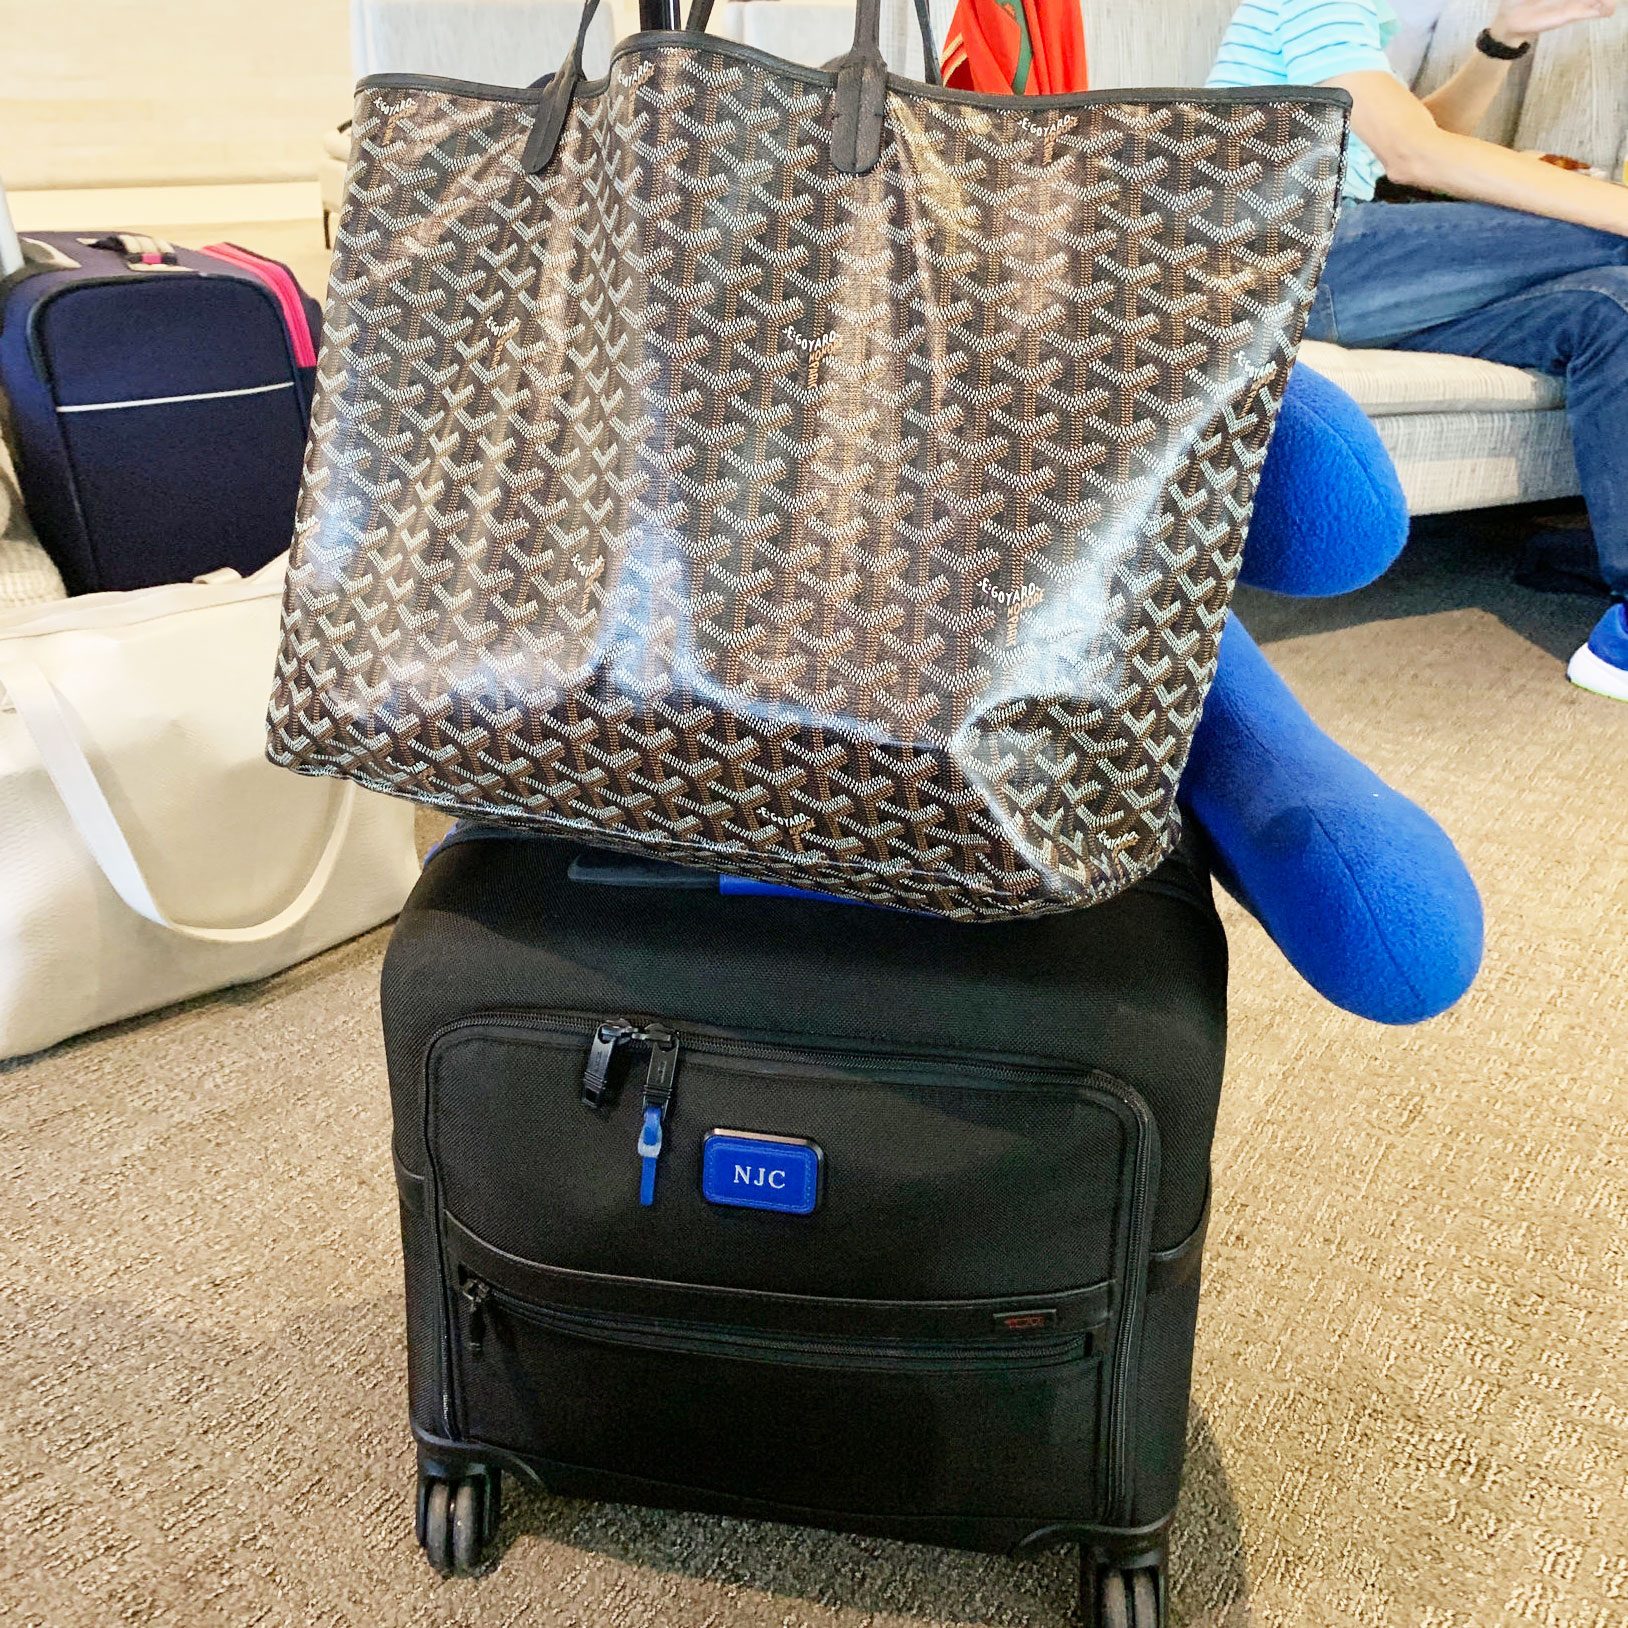 GOYARD ST. LOUIS TOTE & HOW I PACK FOR MY OVER-NIGHT BUSINESS